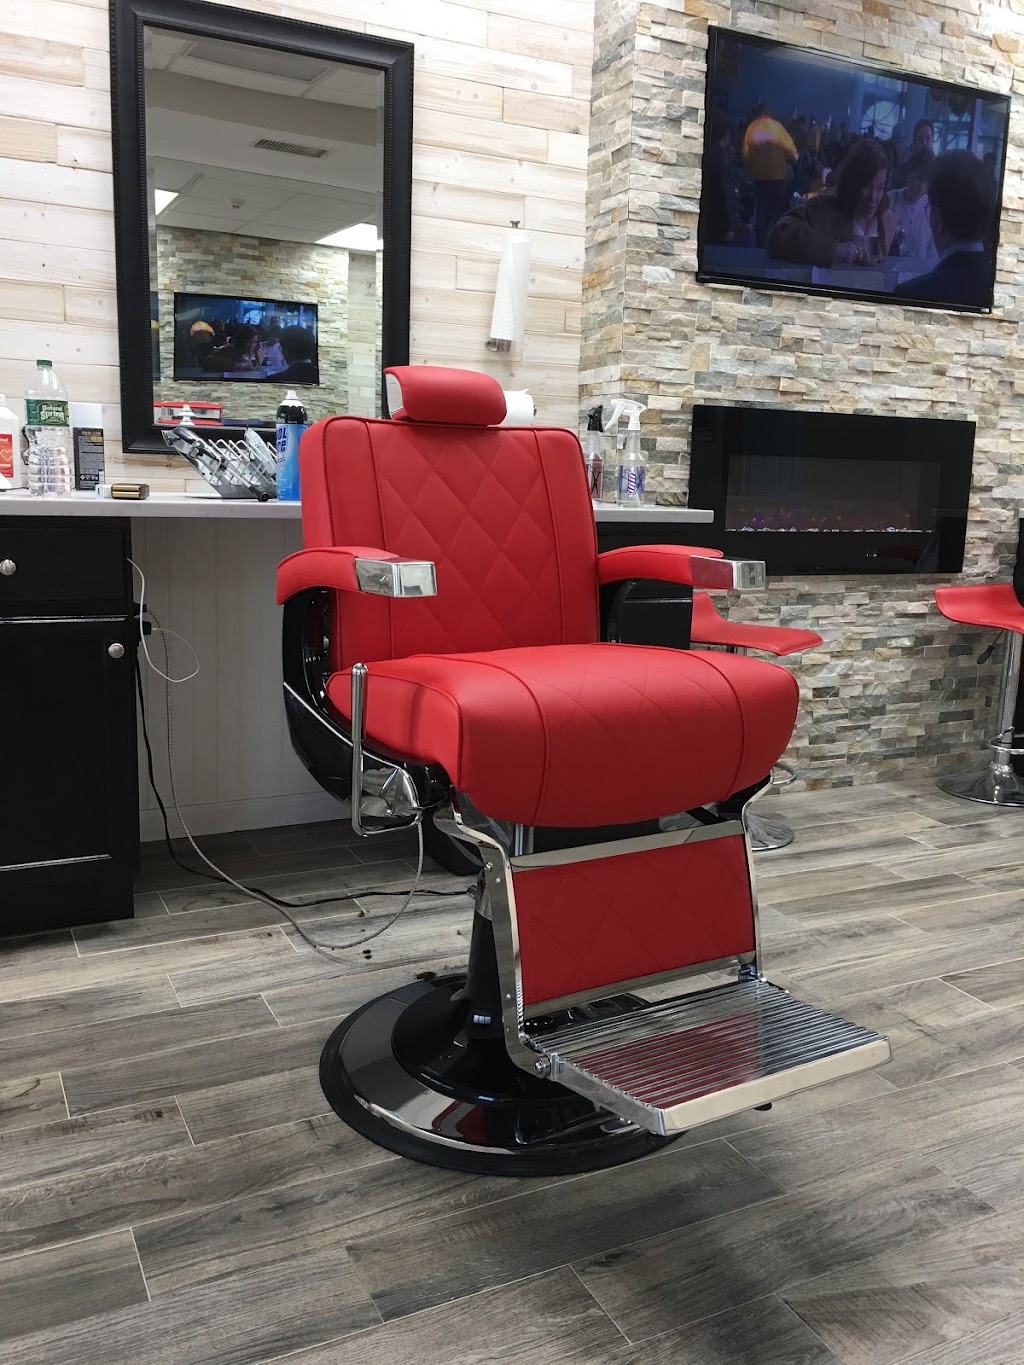 Razorsedge Barber Shop | 697 S Country Rd, East Patchogue, NY 11772 | Phone: (631) 569-4179